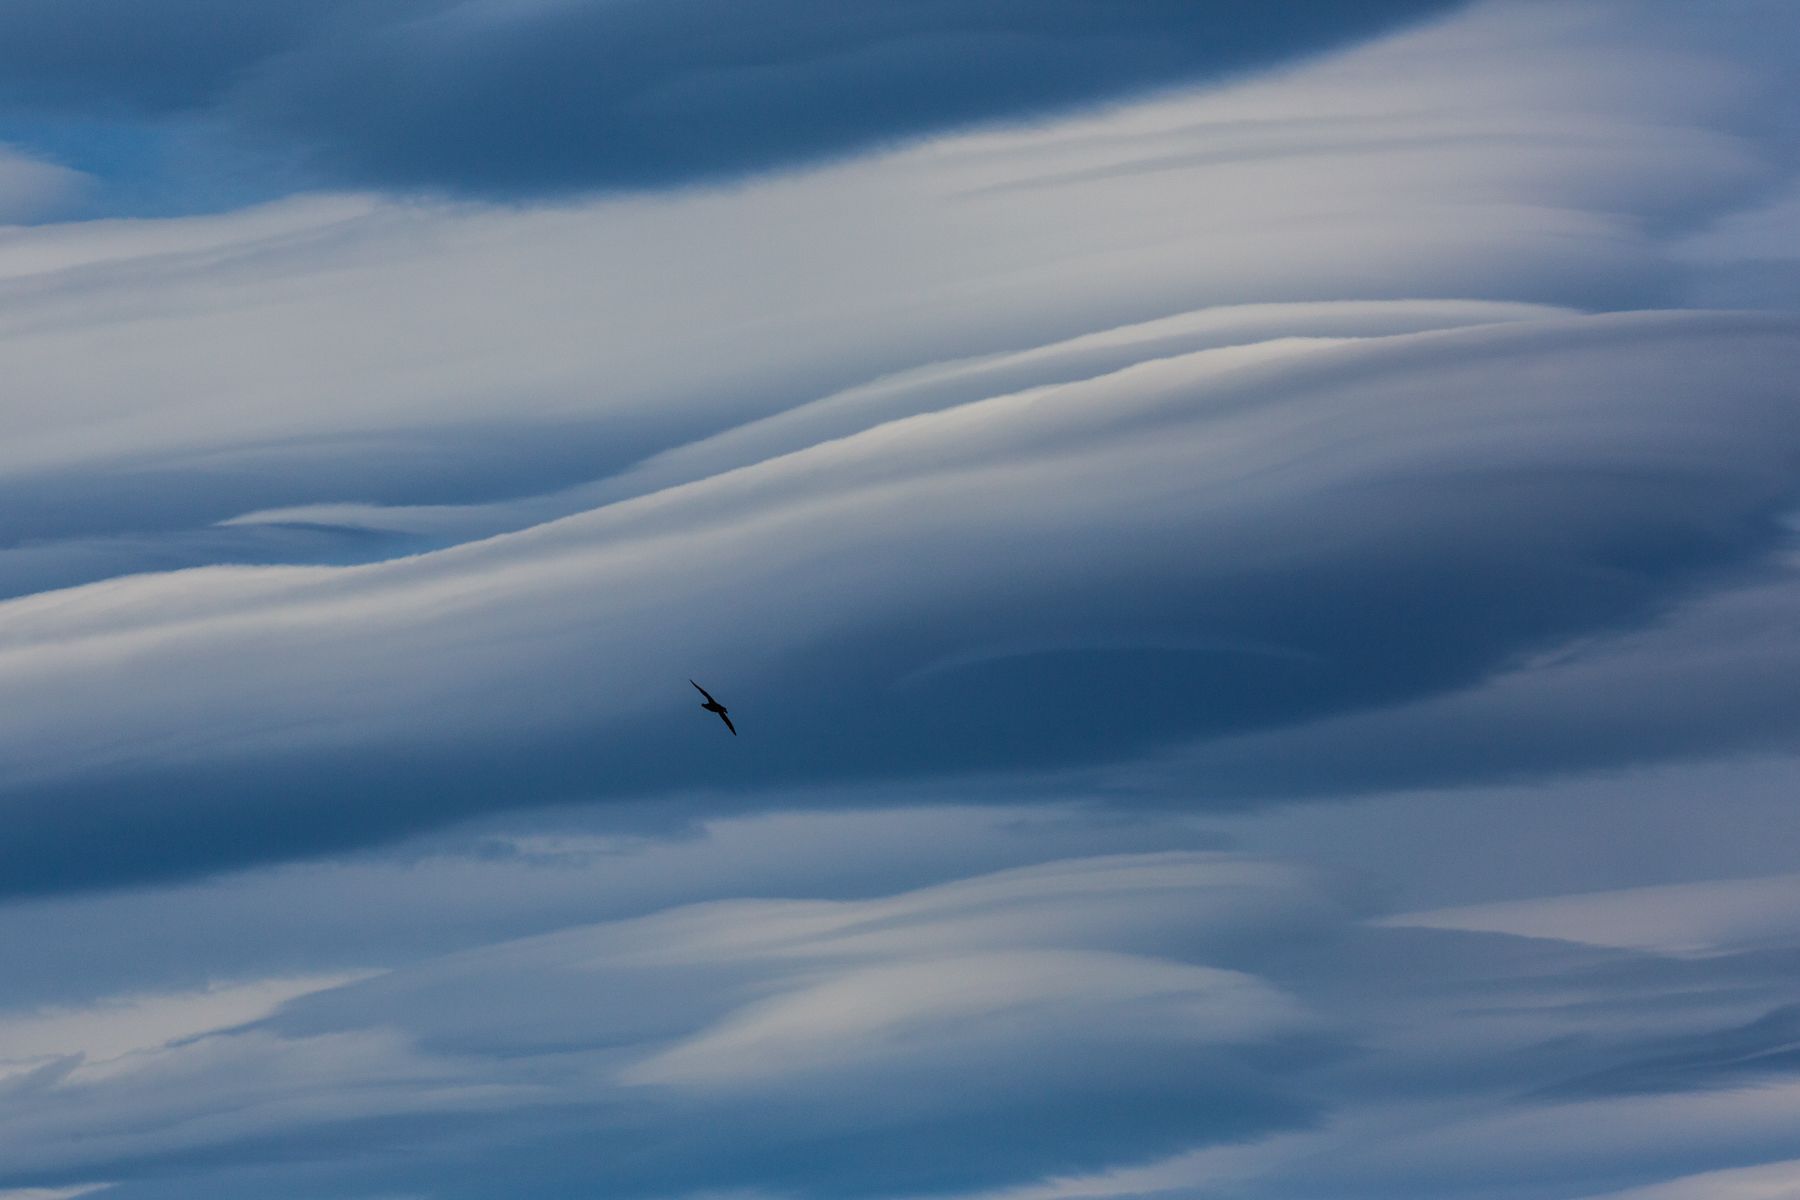 A Southern Giant Petrel flies against lenticular clouds